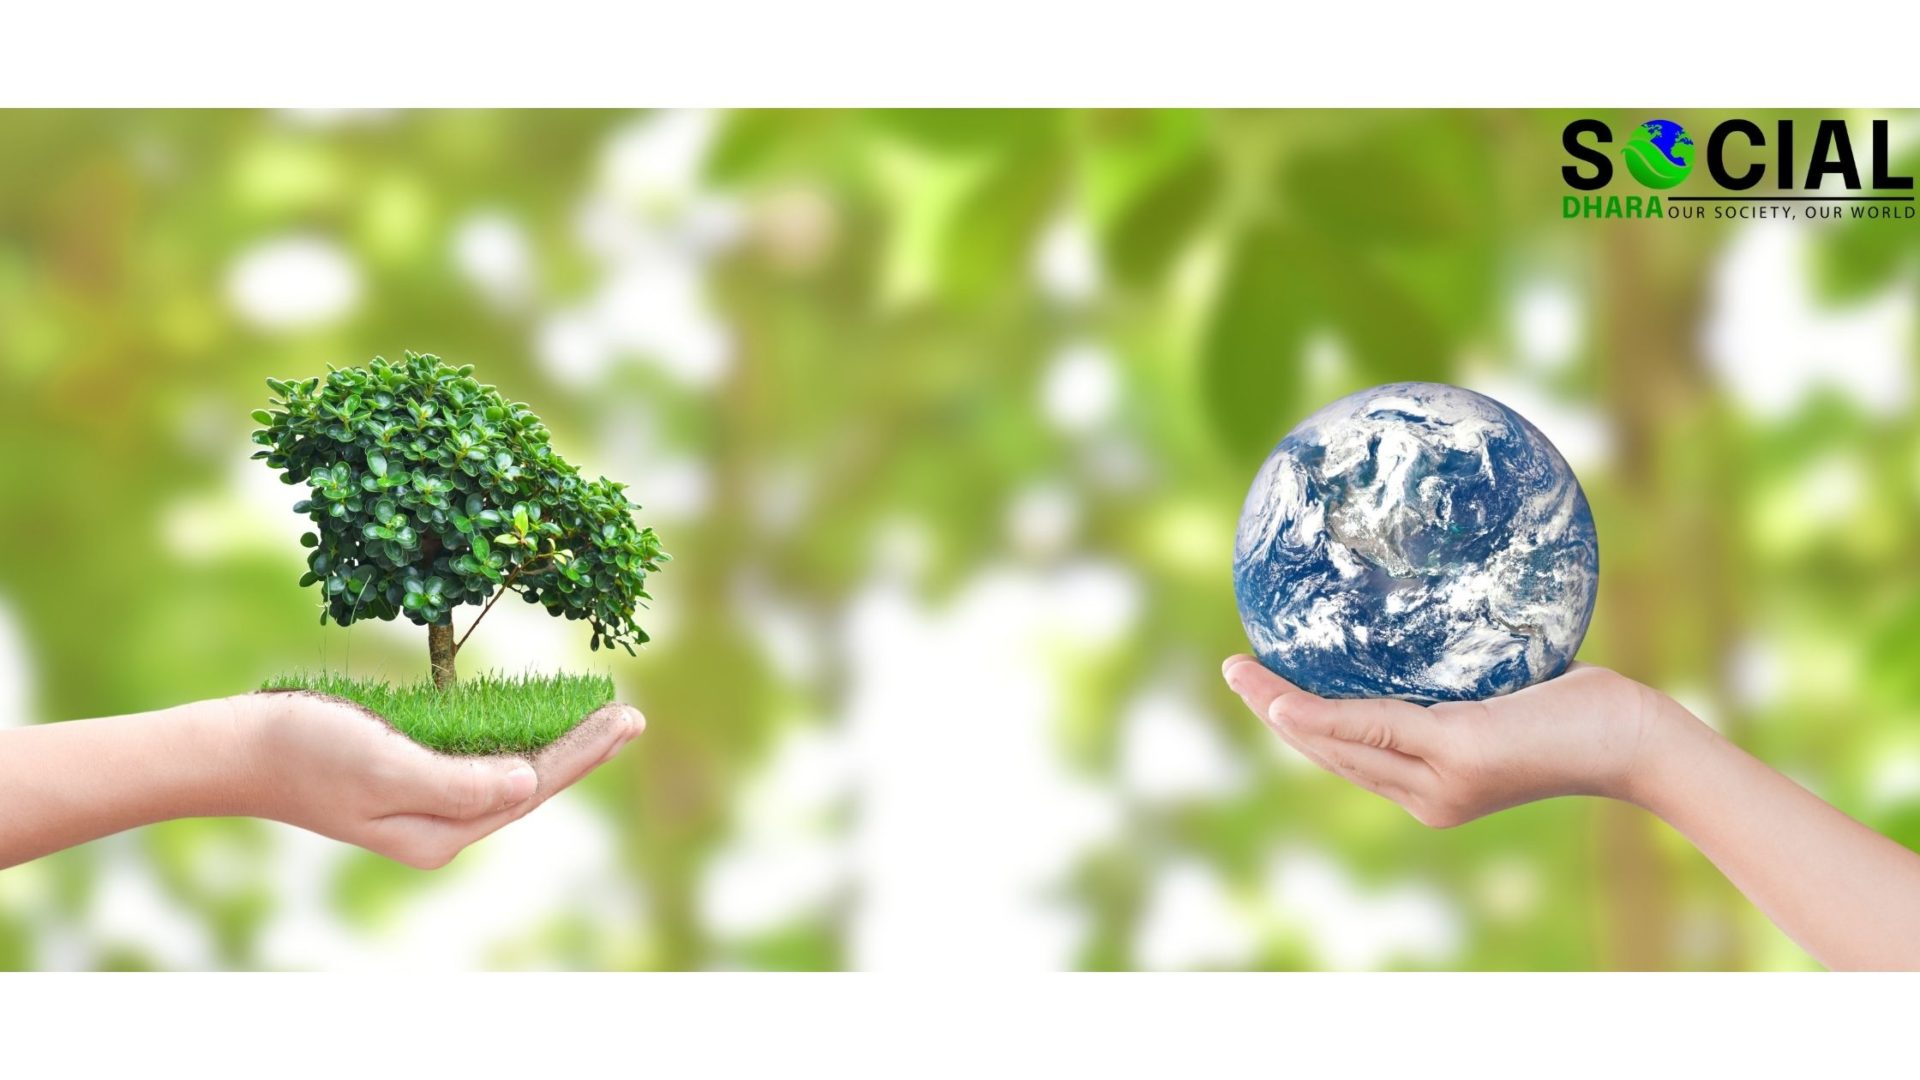 Two hands holding a small plant and the Earth in front of a blurred background of green leaves, emphasizing the importance of nature in our daily lives and its impact on human health.